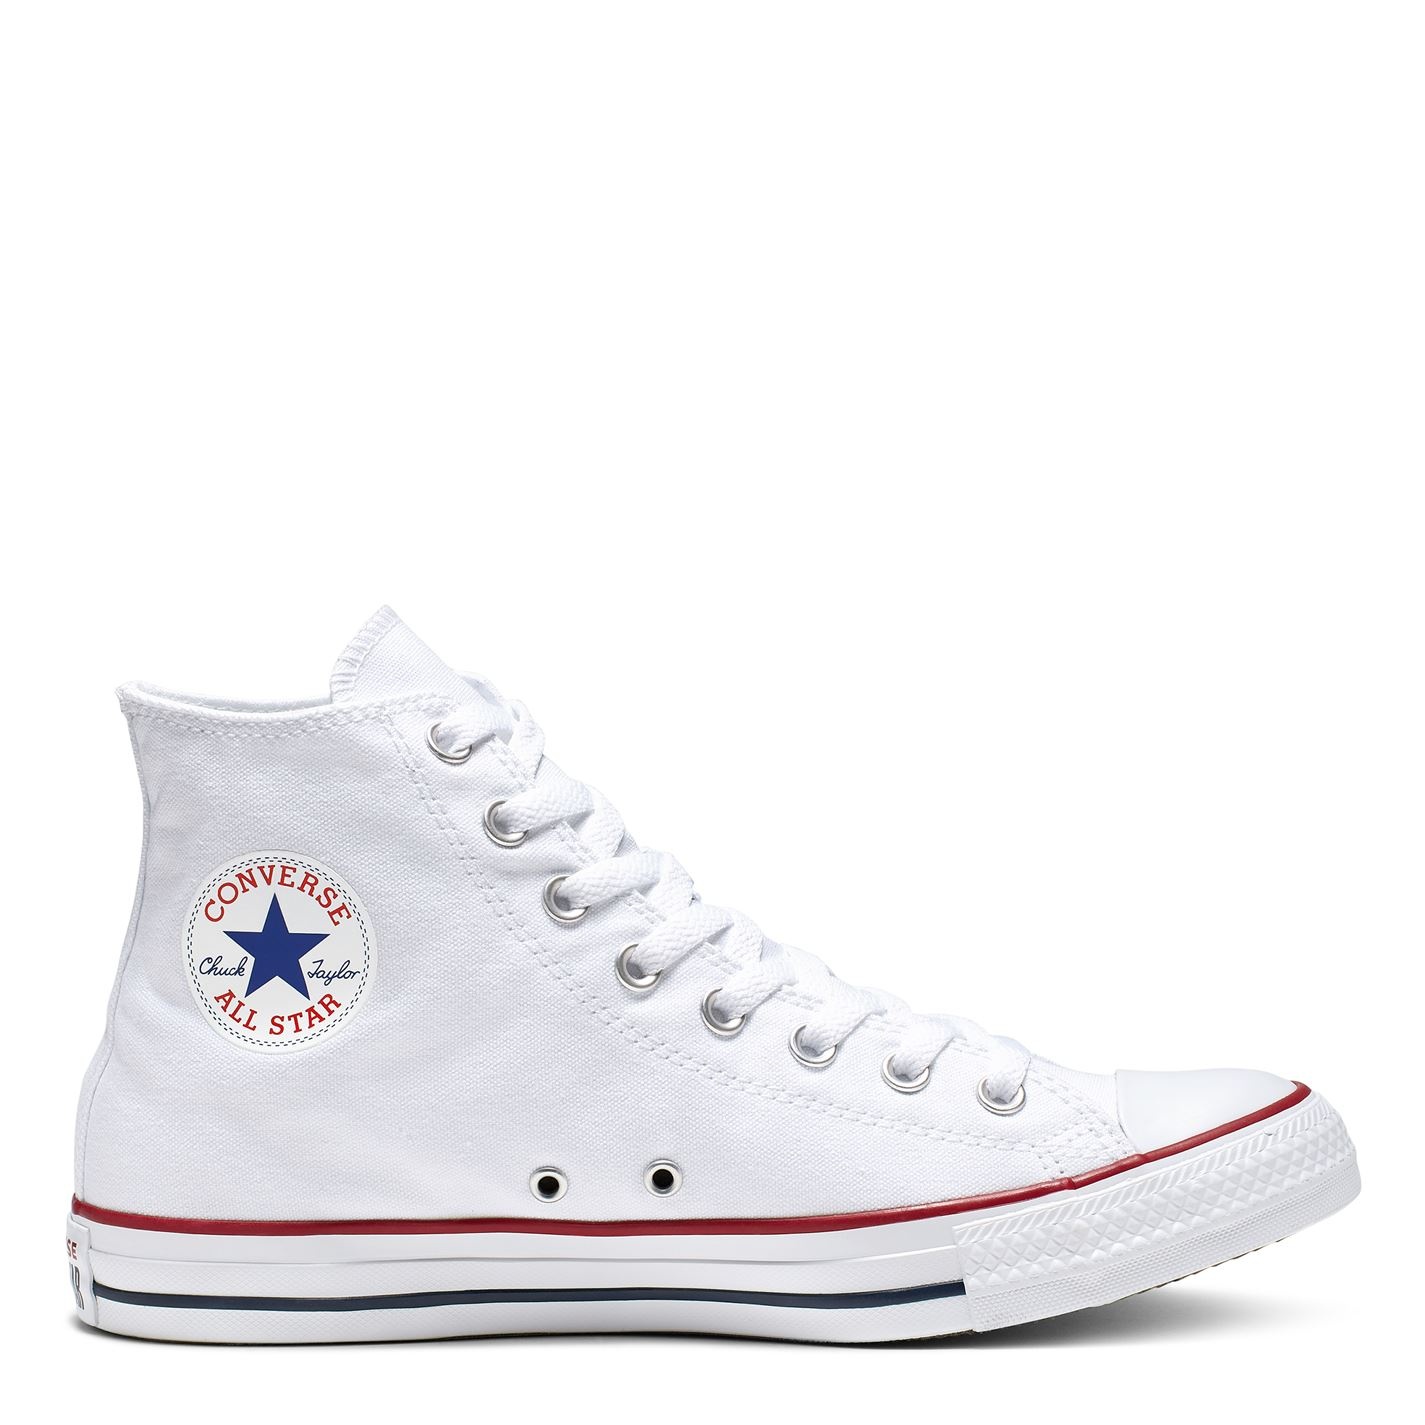 TAYLOR ALL STAR CLASSIC TRAINERS - 1